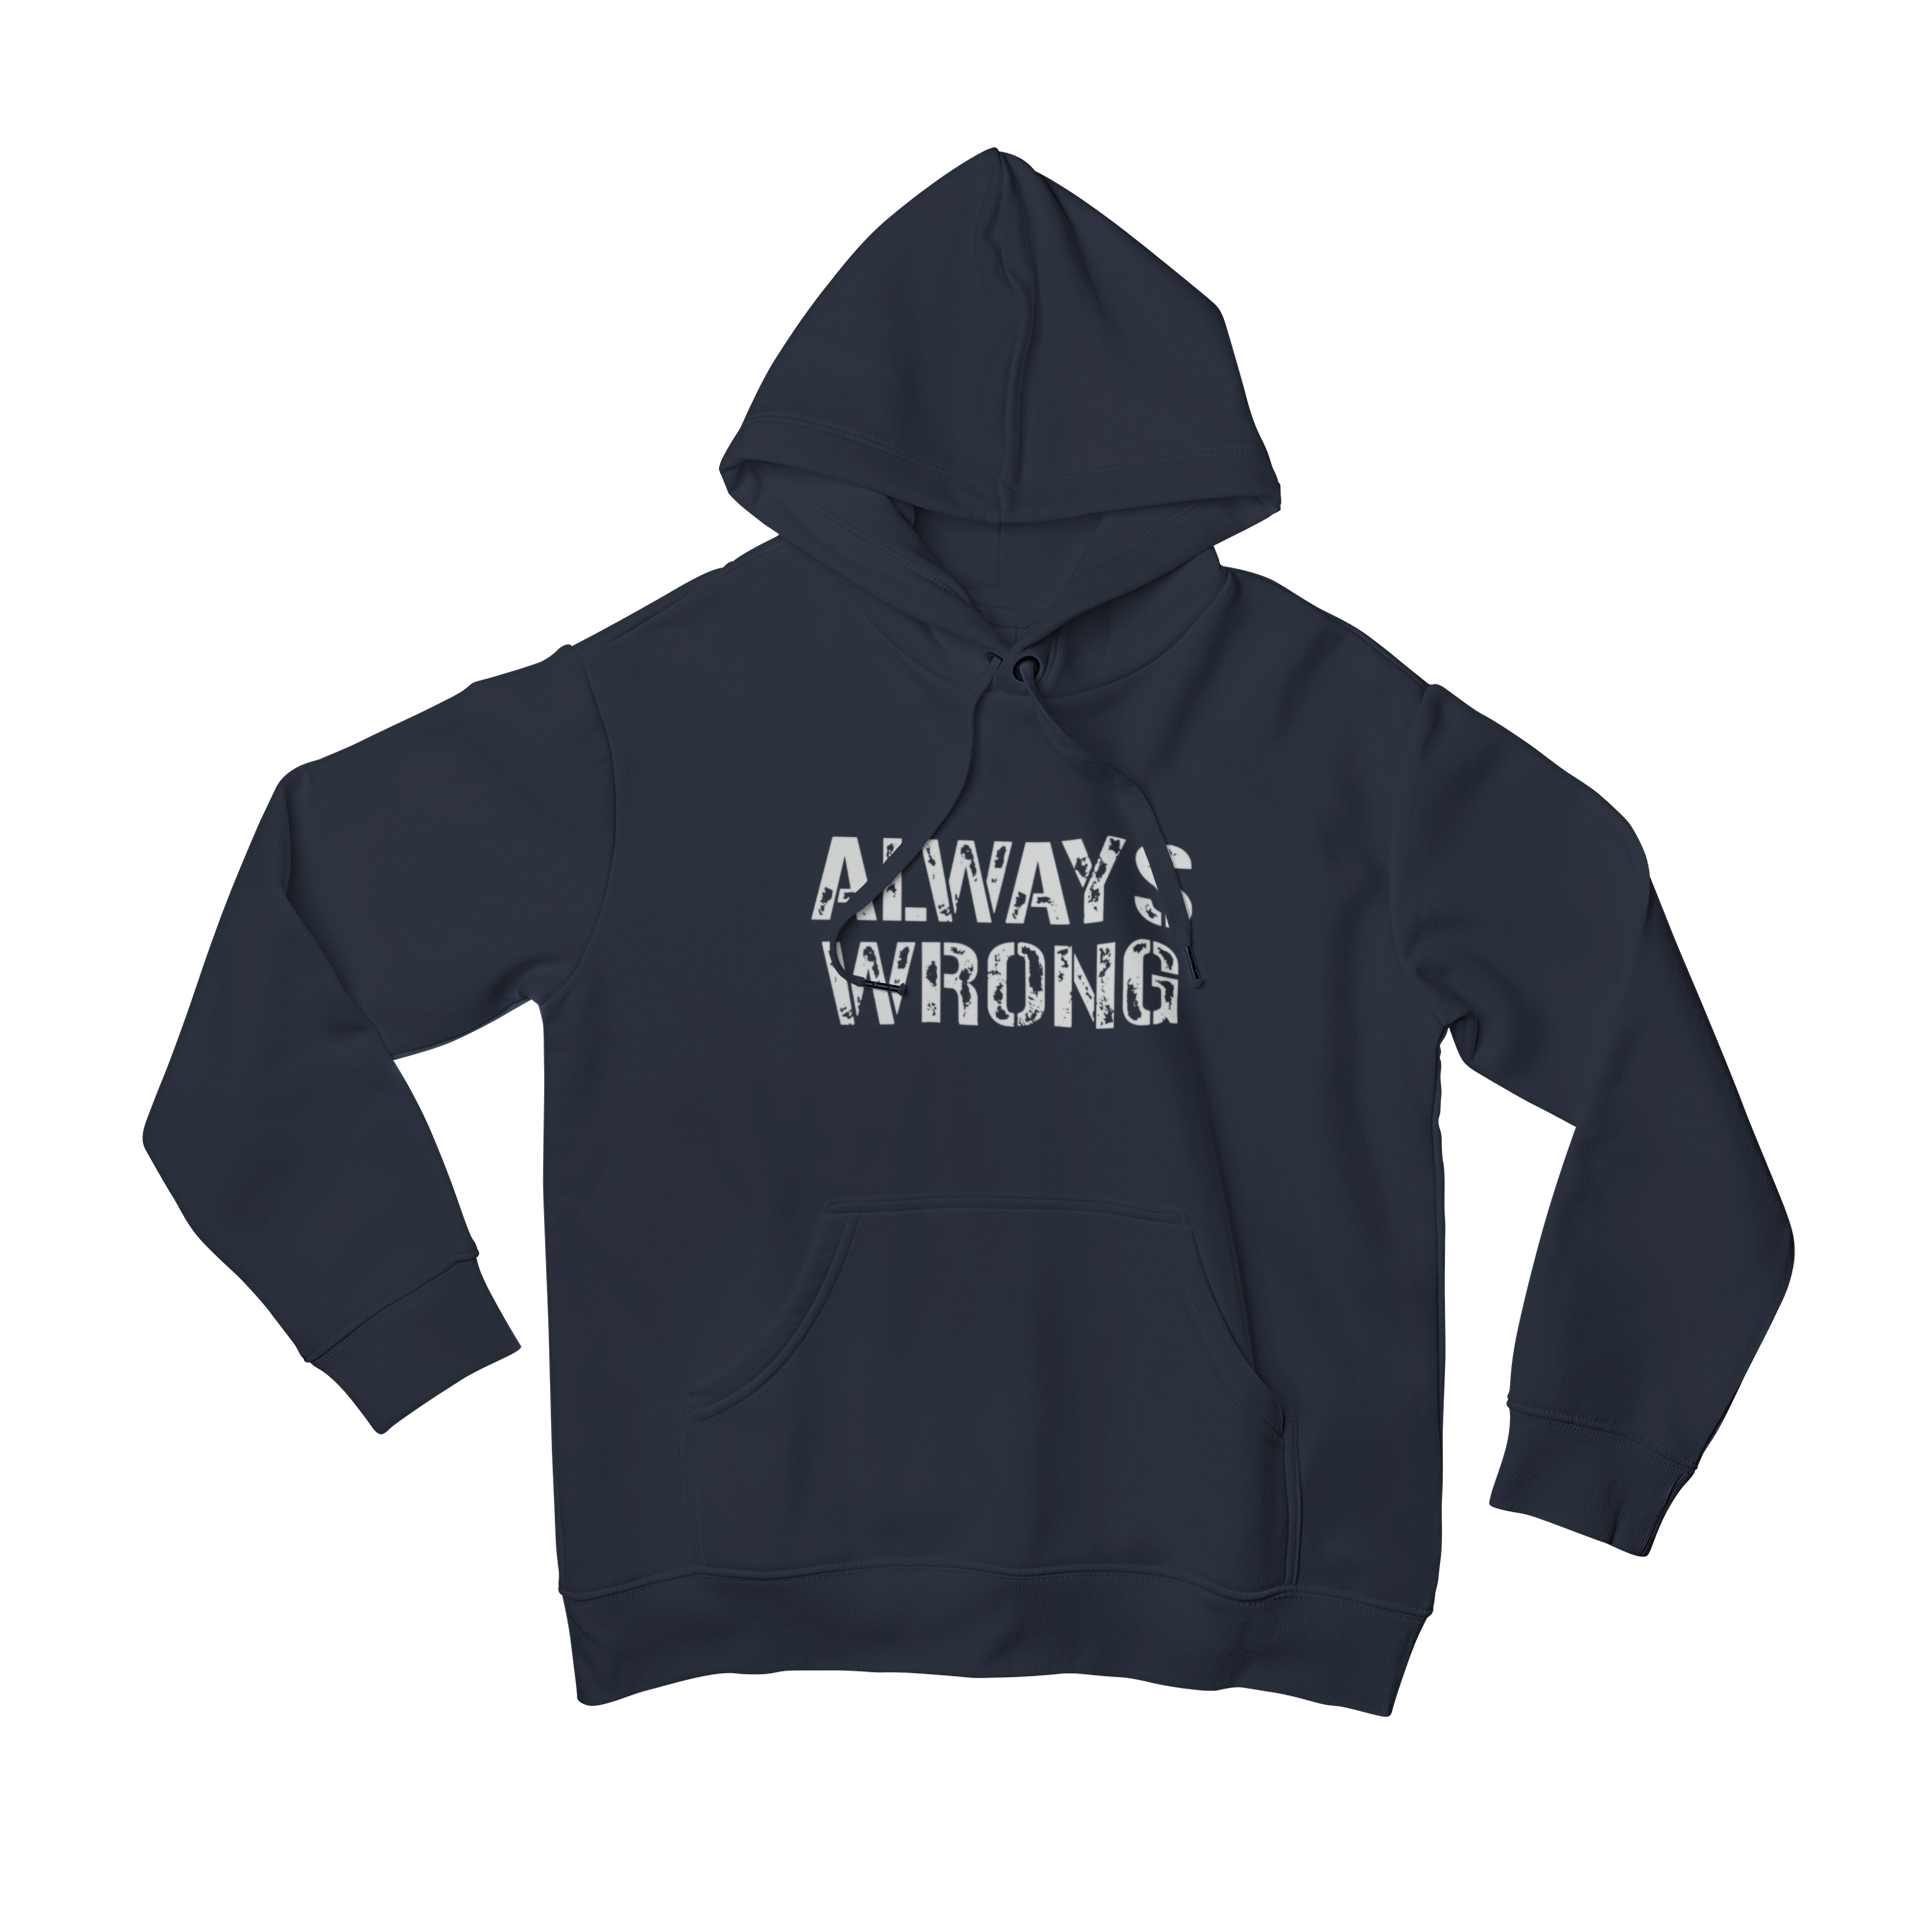 Looking for a bold statement? Our Always Wrong hoodie features a matching design with our Always Right hoodie. With a trendy slogan, this hoodie is perfect for those who confidently embrace their unique perspective. Stand out and make a statement with the Always Wrong hoodie.